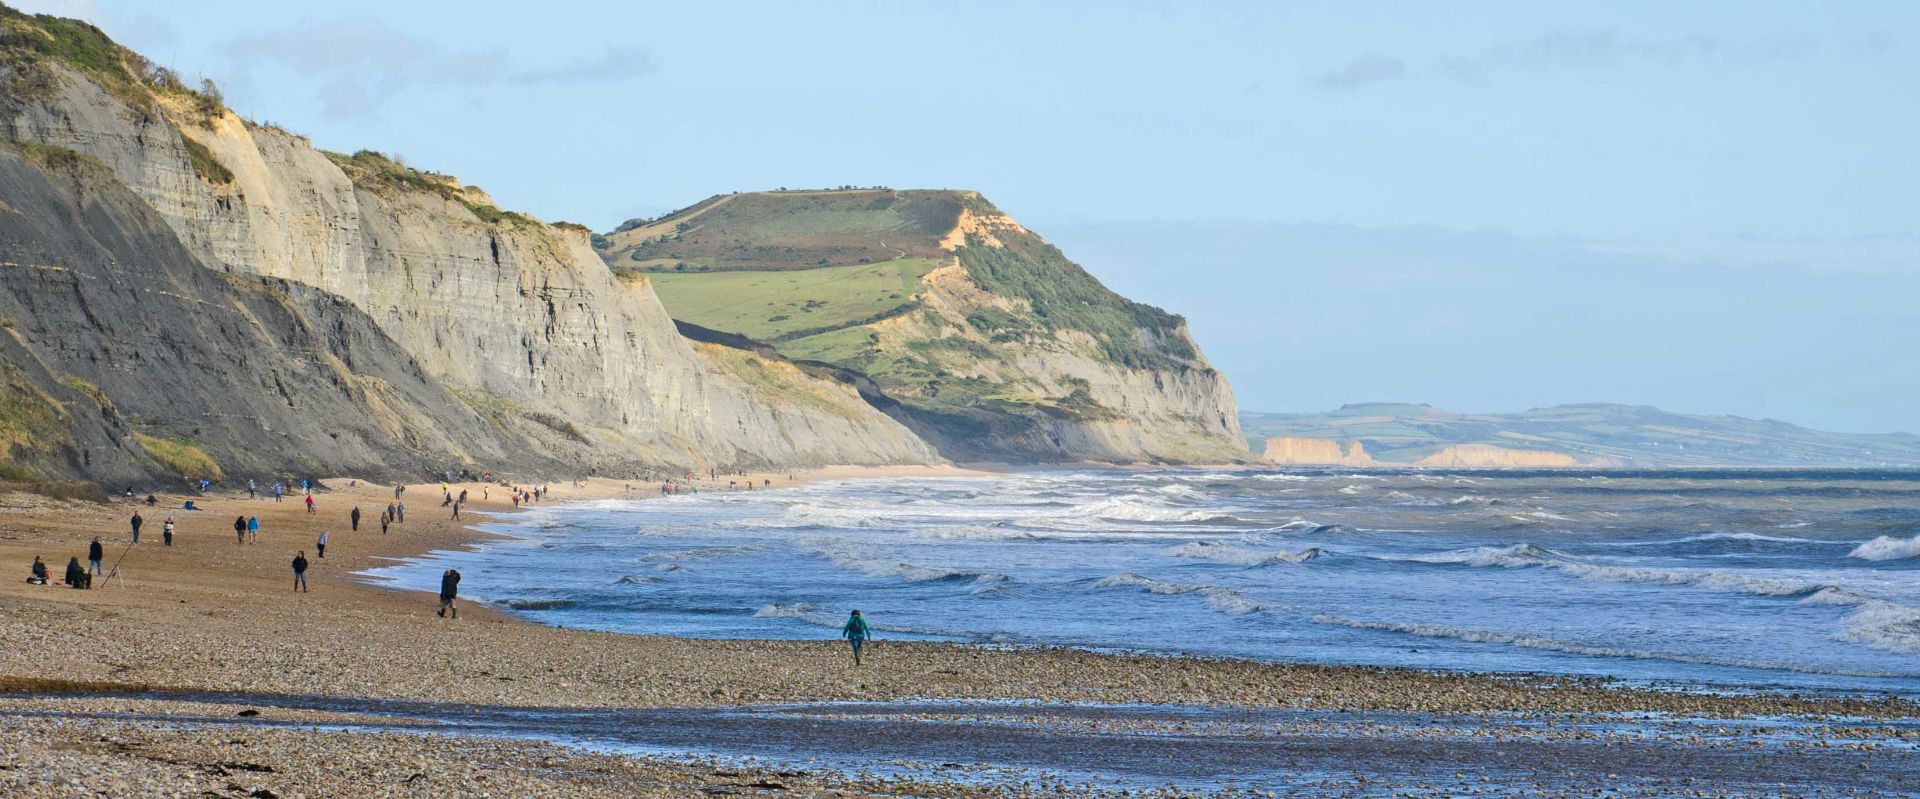 View along the beach at Charmouth on the Jurassic Coast